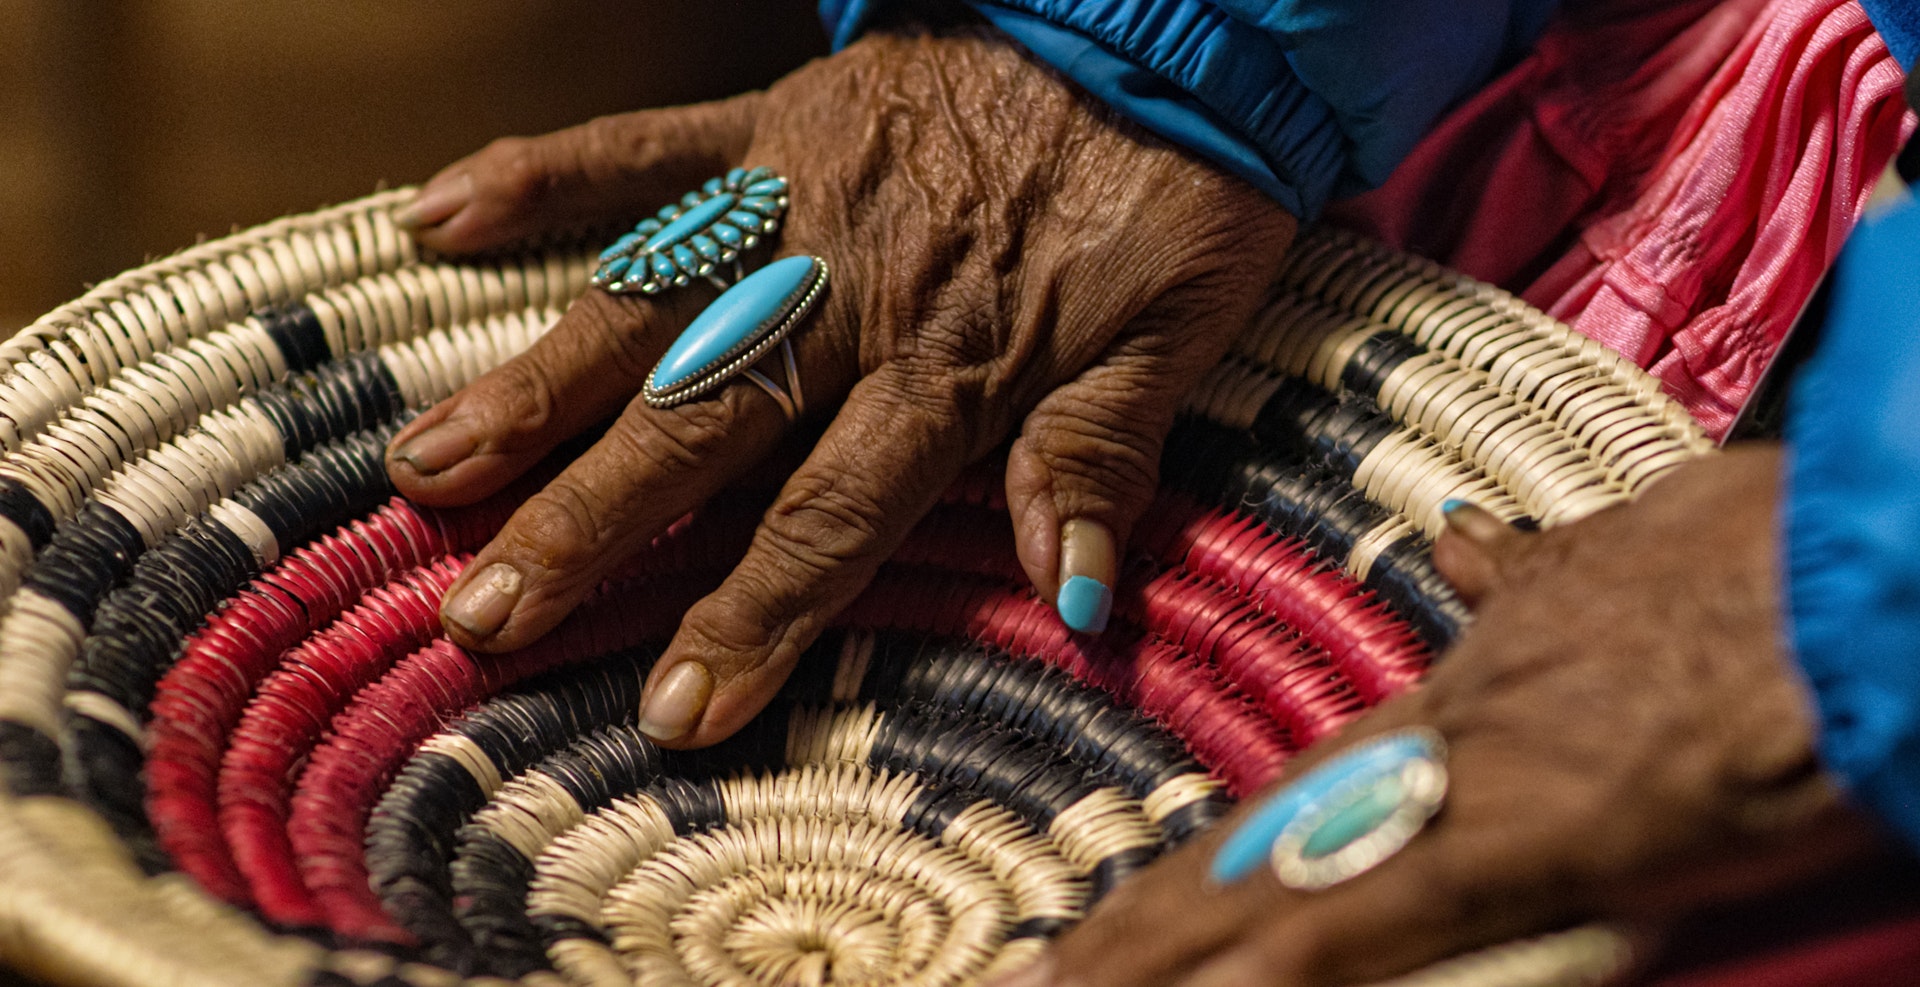 A Navajo woman wearing turquoise rings on her fingers touches a woven basket